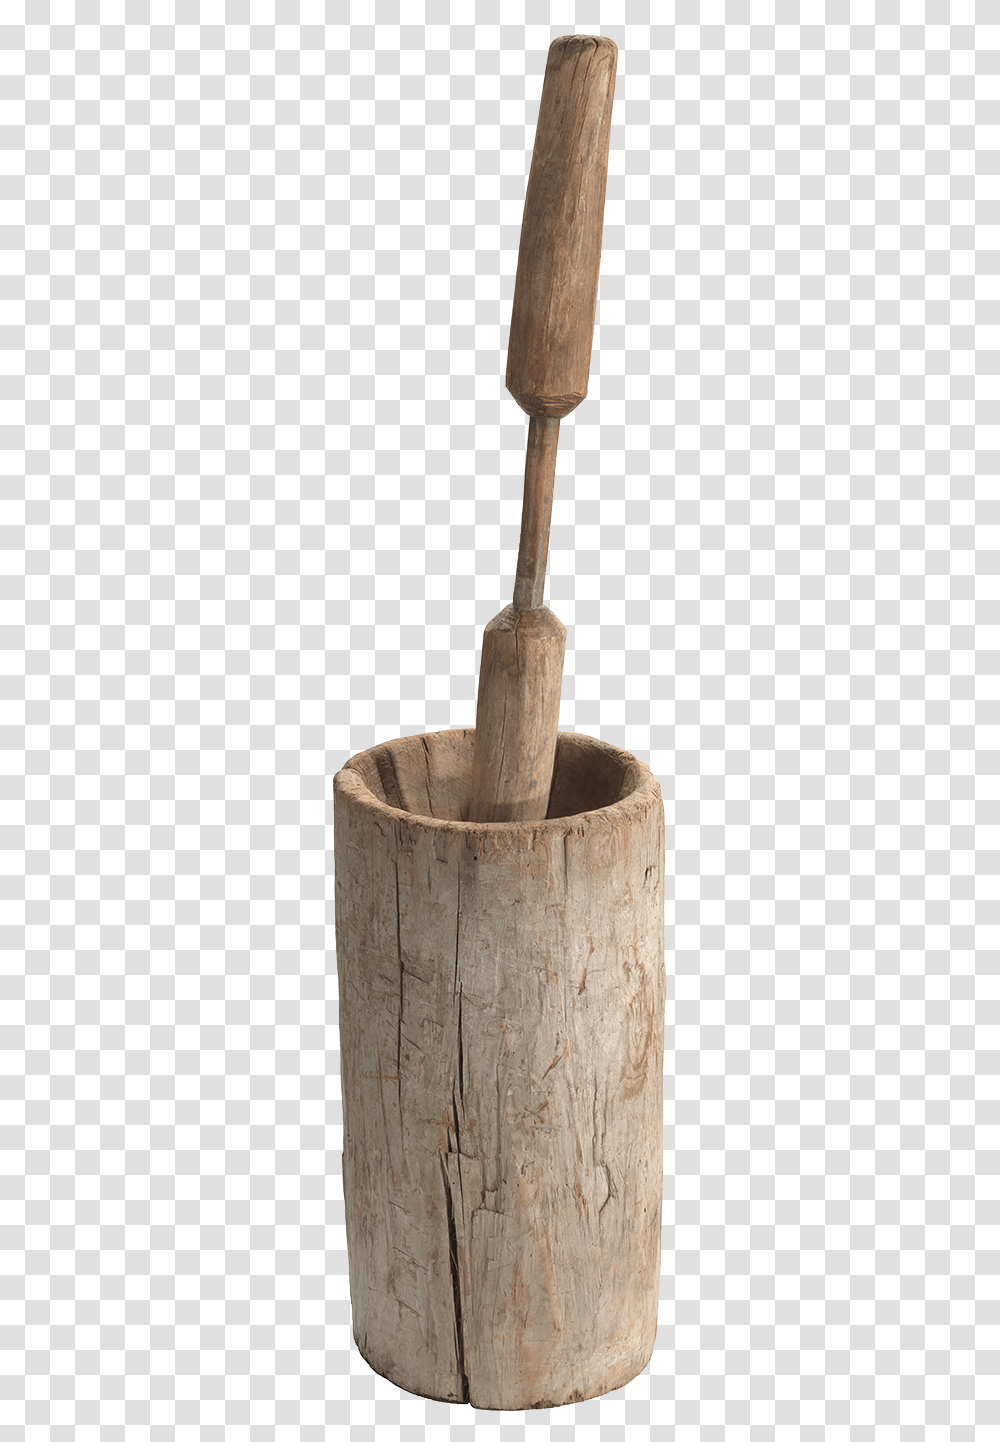 Pestle For Pounding Rice, Mortar, Cannon, Weapon, Weaponry Transparent Png